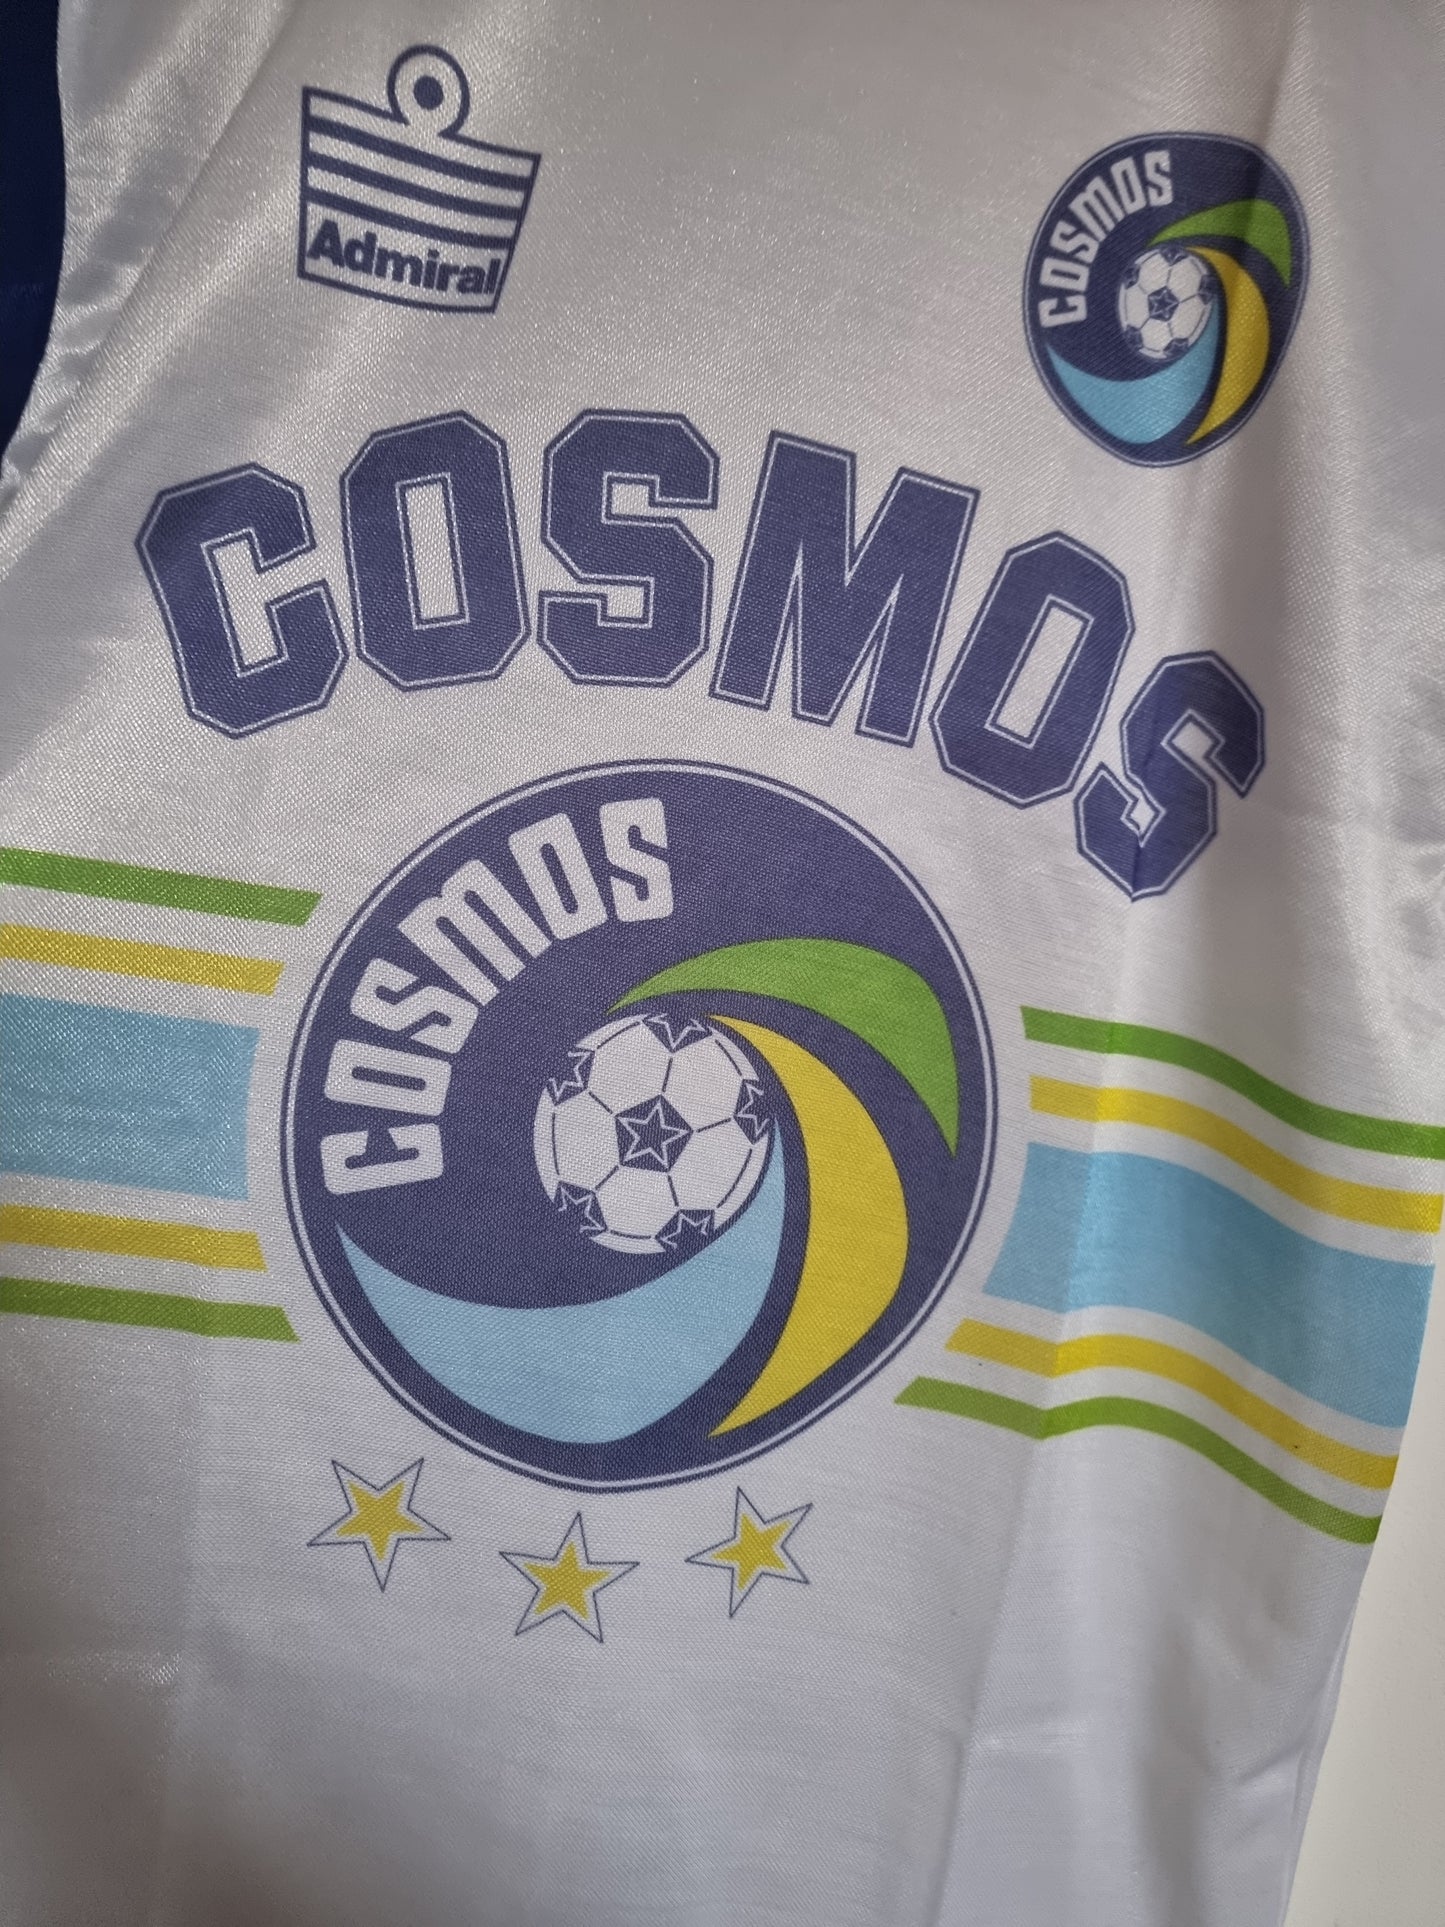 Admiral New York Cosmos 80s Leisure T- Shirt Small